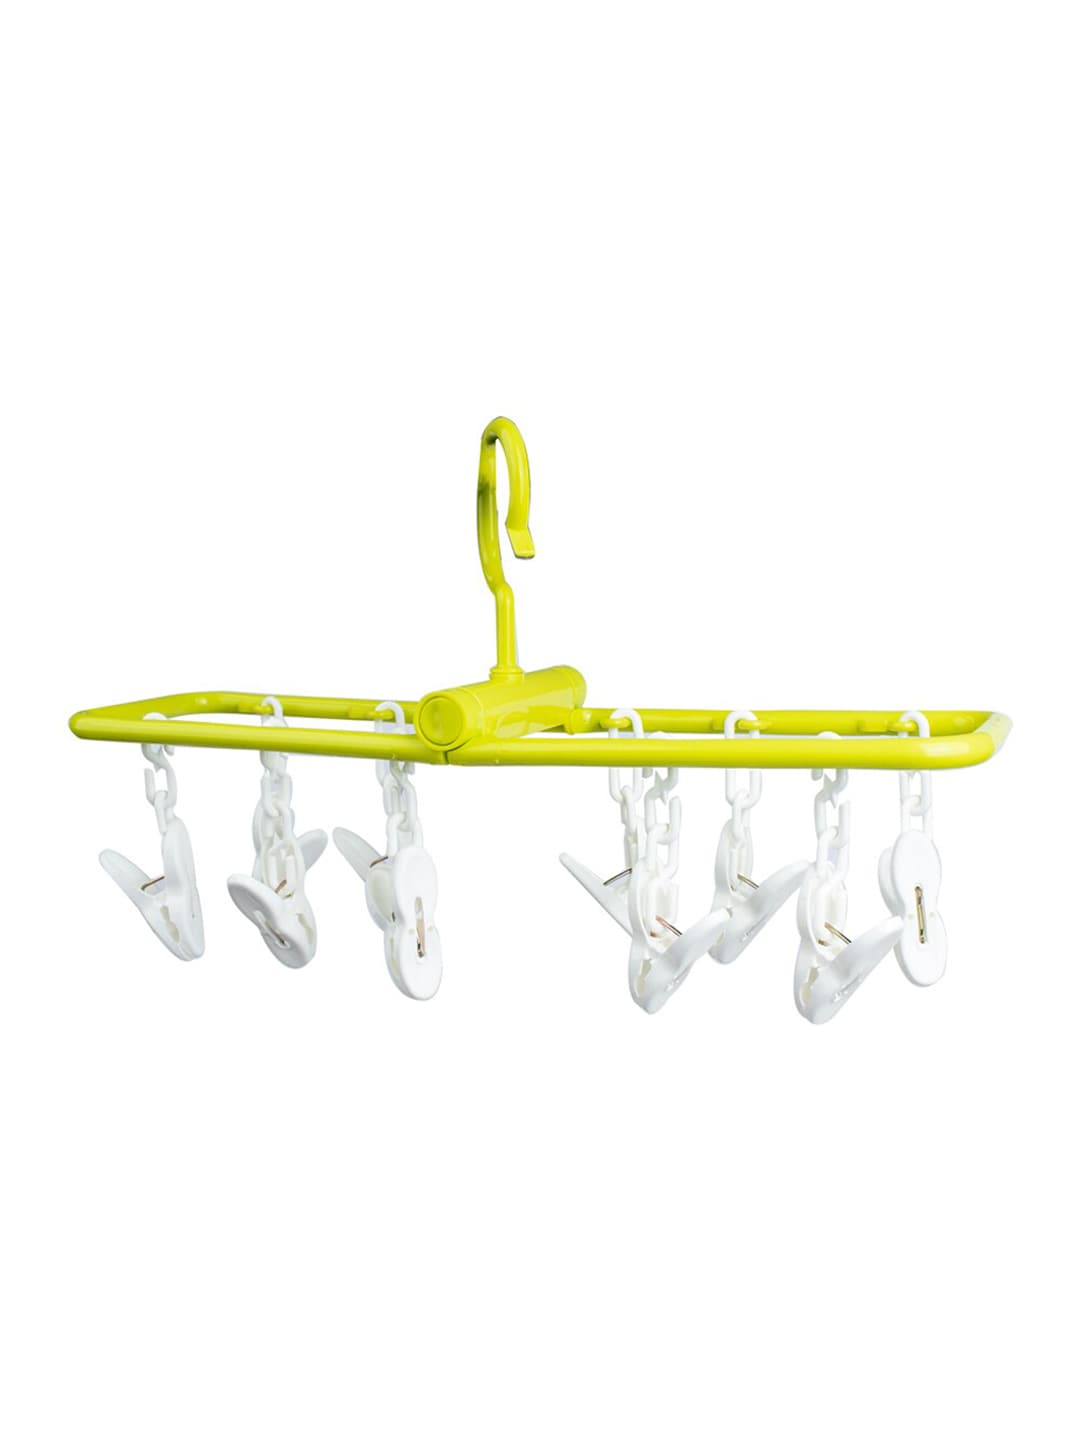 MARKET99 Green Solid Cloth Hanger With 10 Clips Price in India